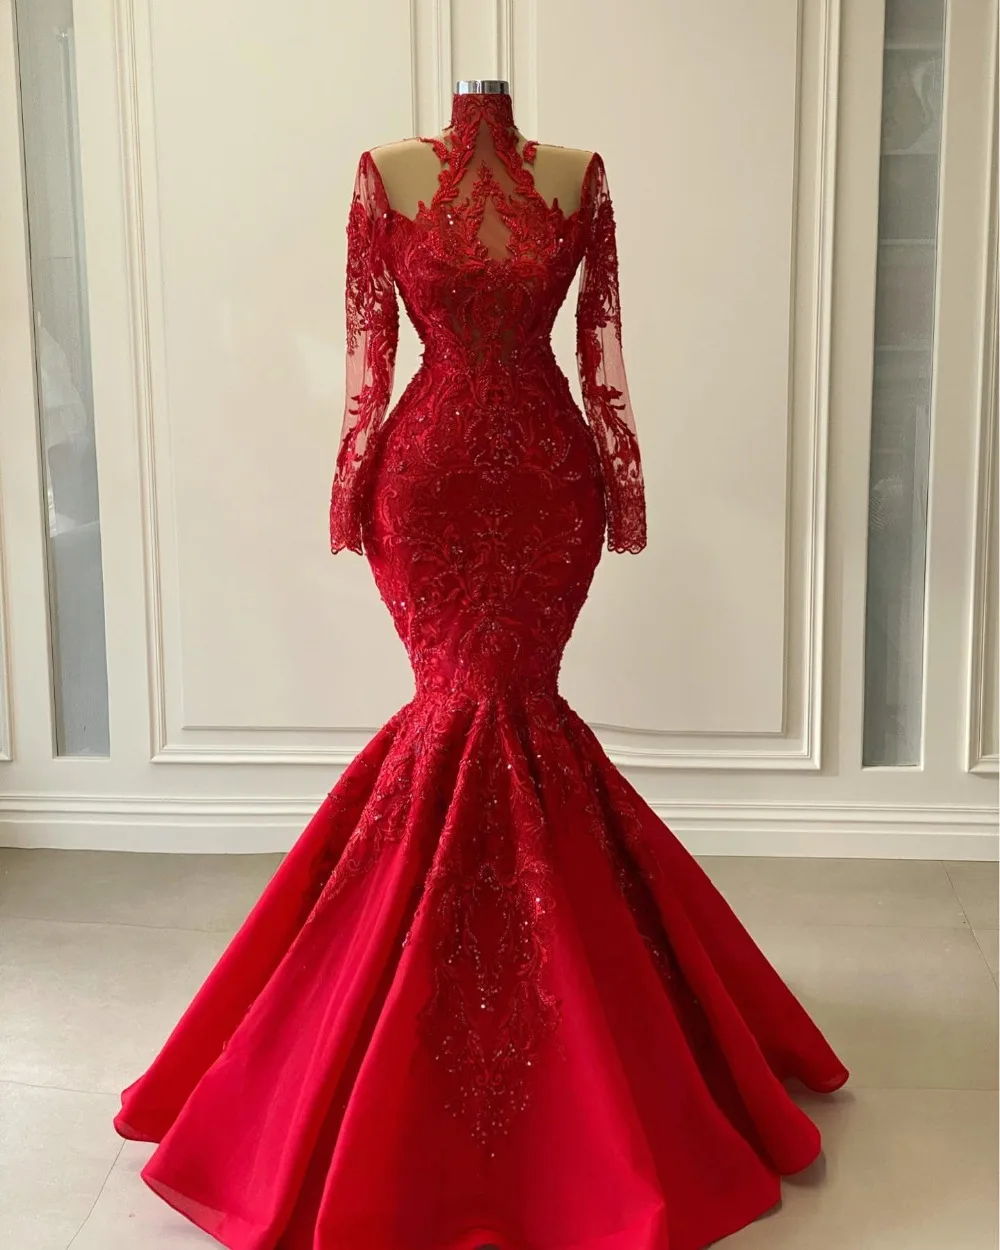 Modest Red Lace Mermaid Evening Dresses 2022 Real Image Appliques Beaded Long Prom Gowns With Full Sleeves Formal Party Dress evening gowns Evening Dresses